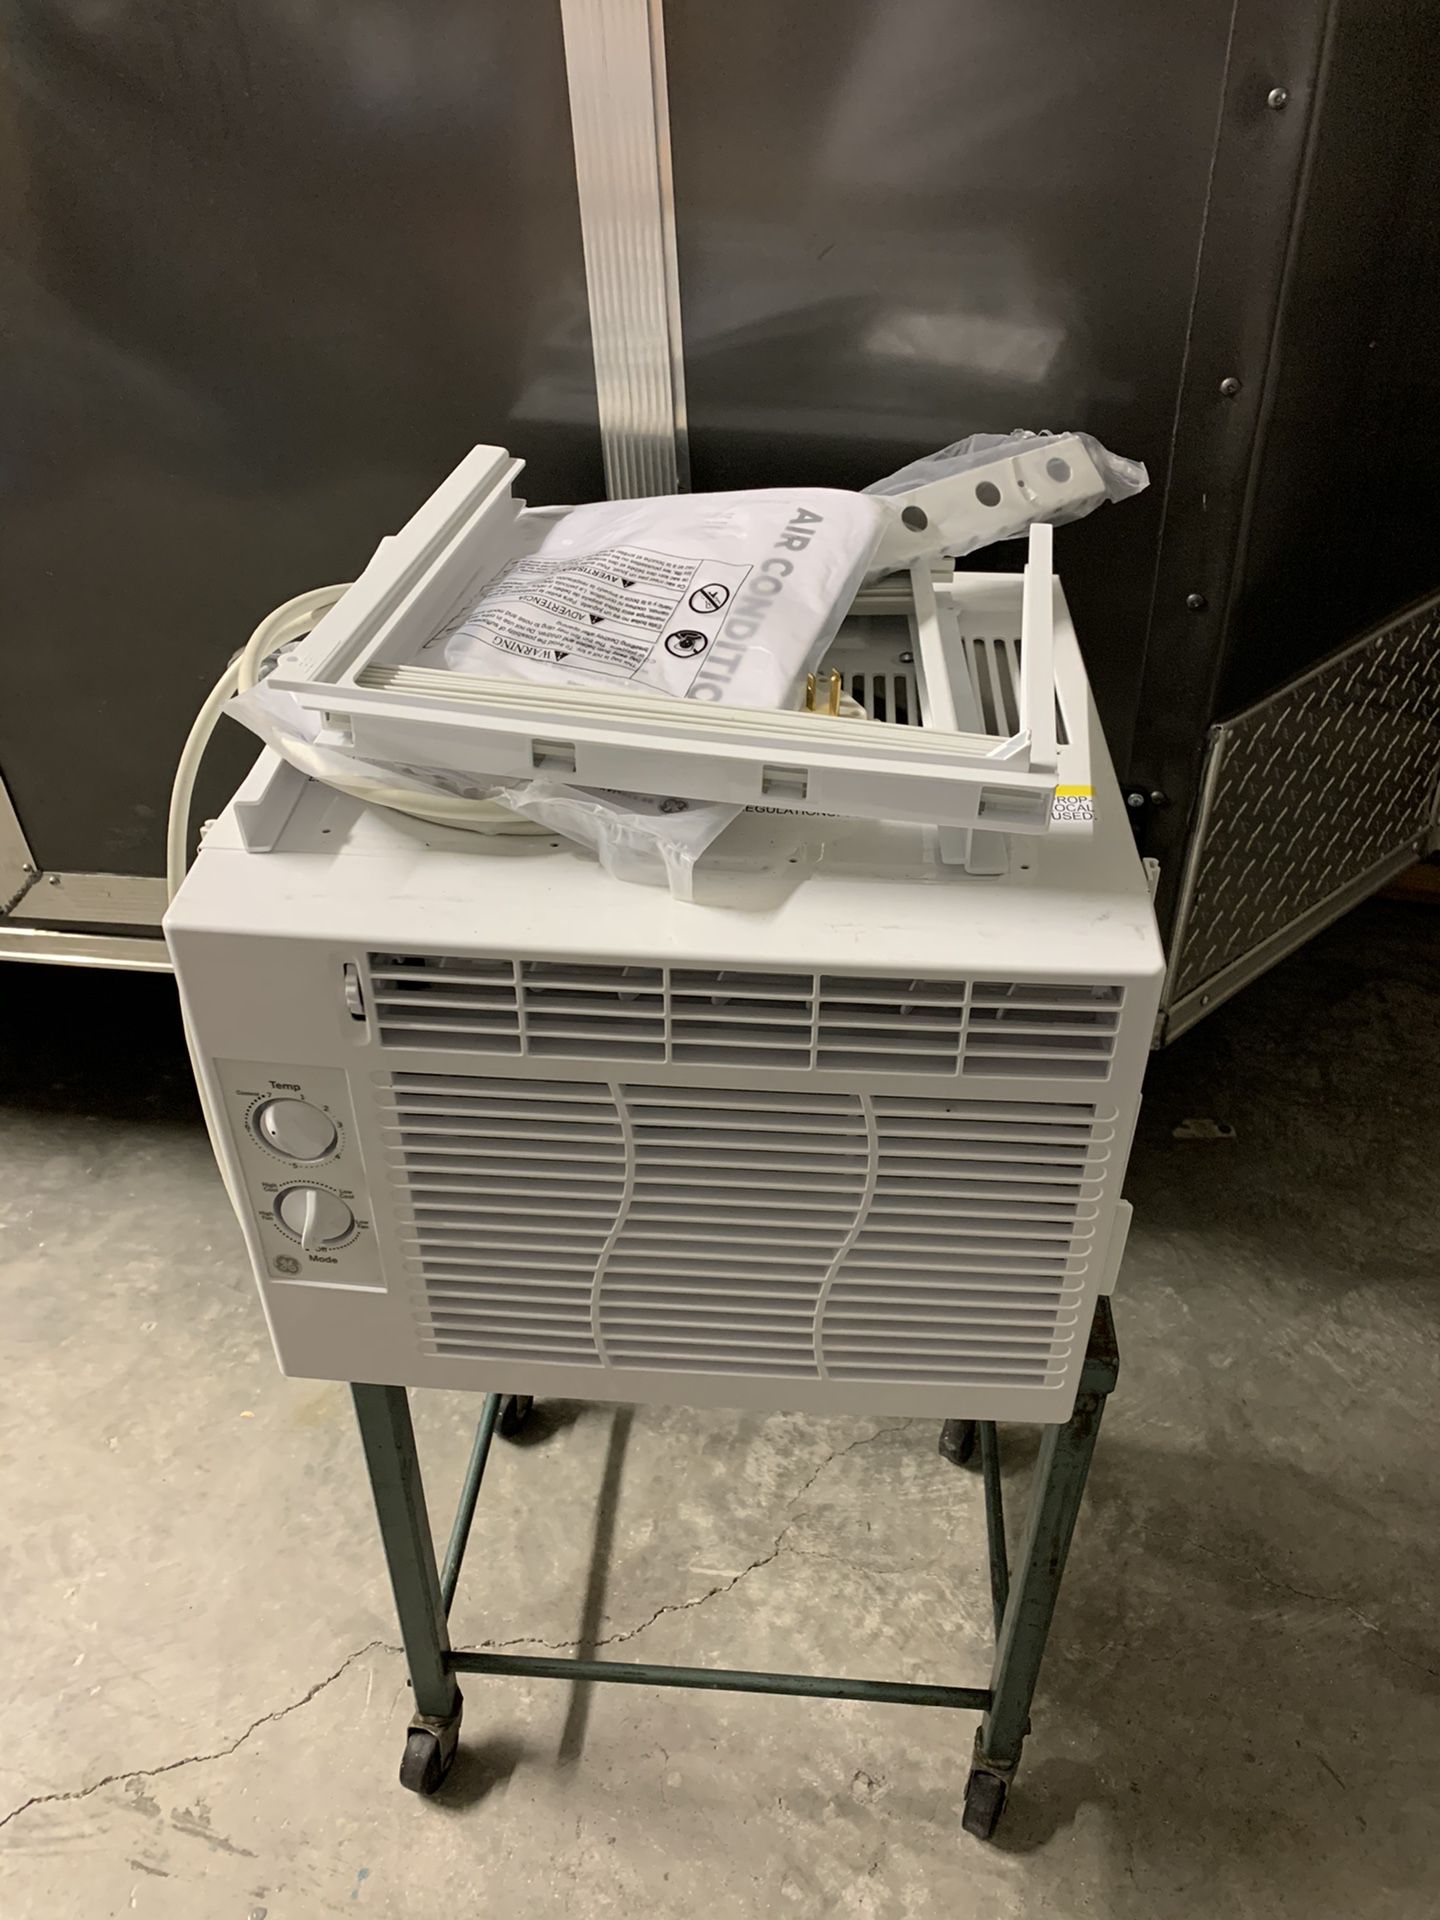 New GE Window AC never used 5,000btu air conditioner